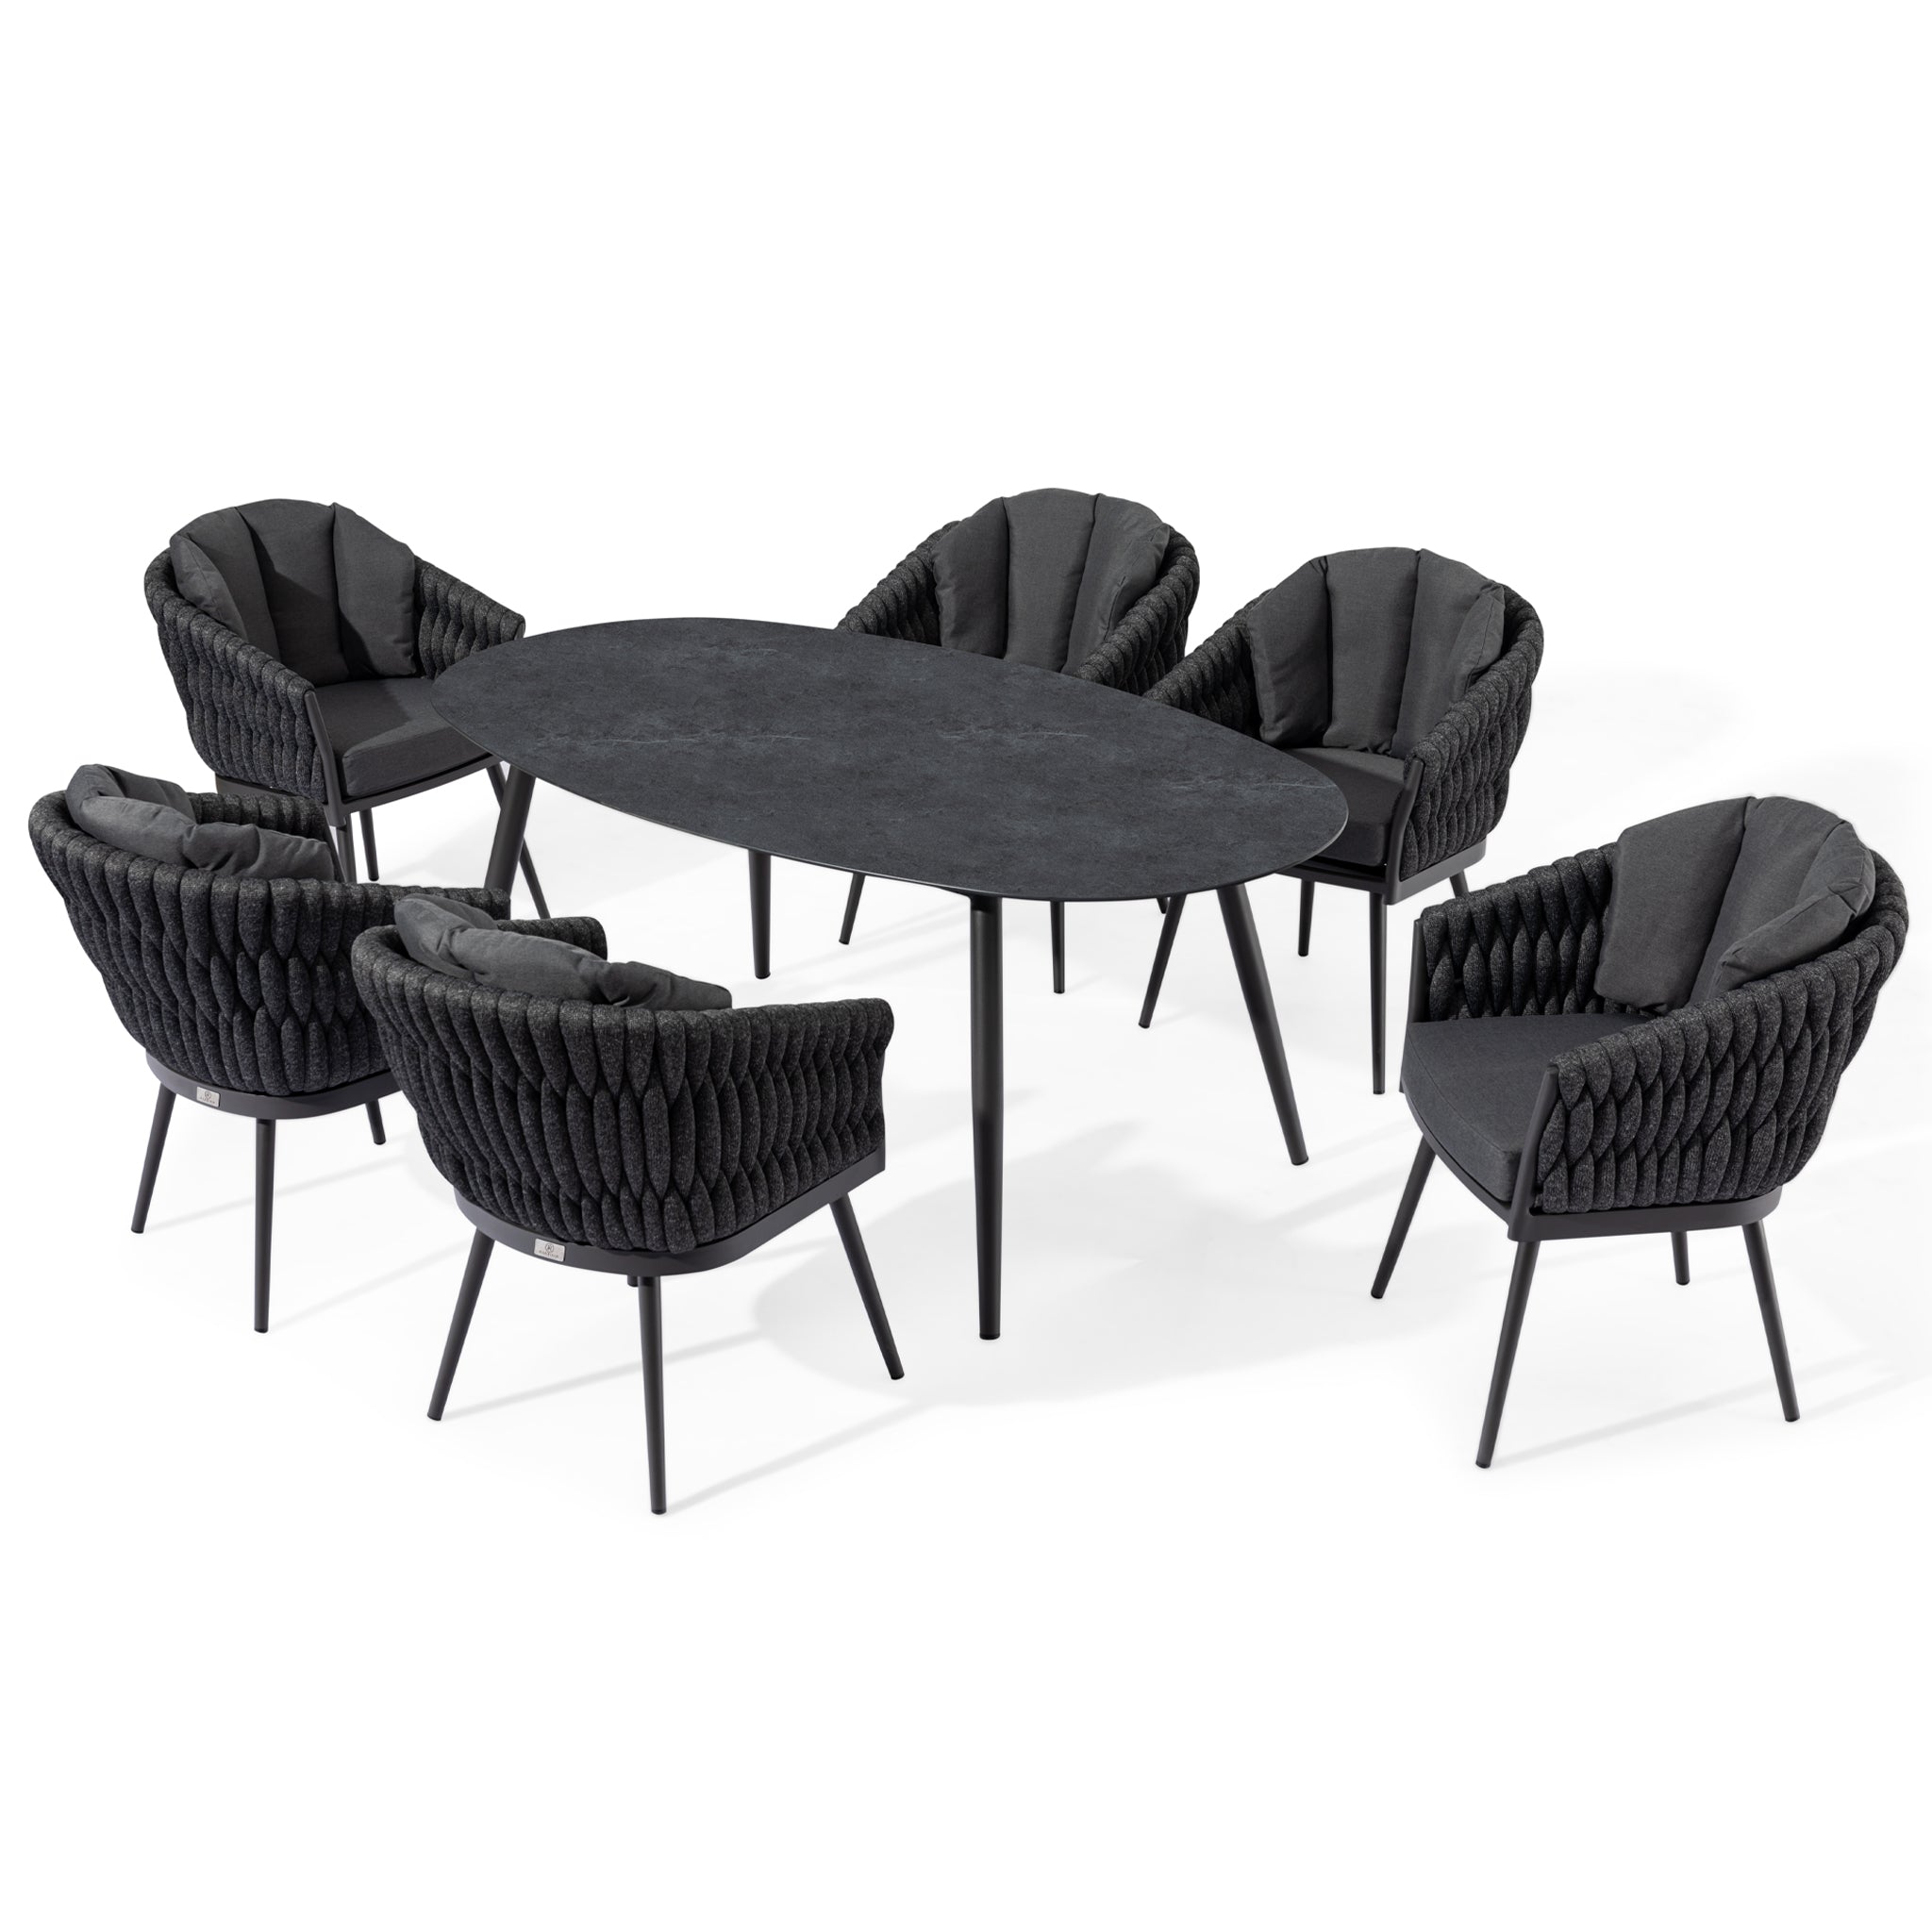 Palma 6 Seat Rope Oval Dining Set with Ceramic Table in Grey